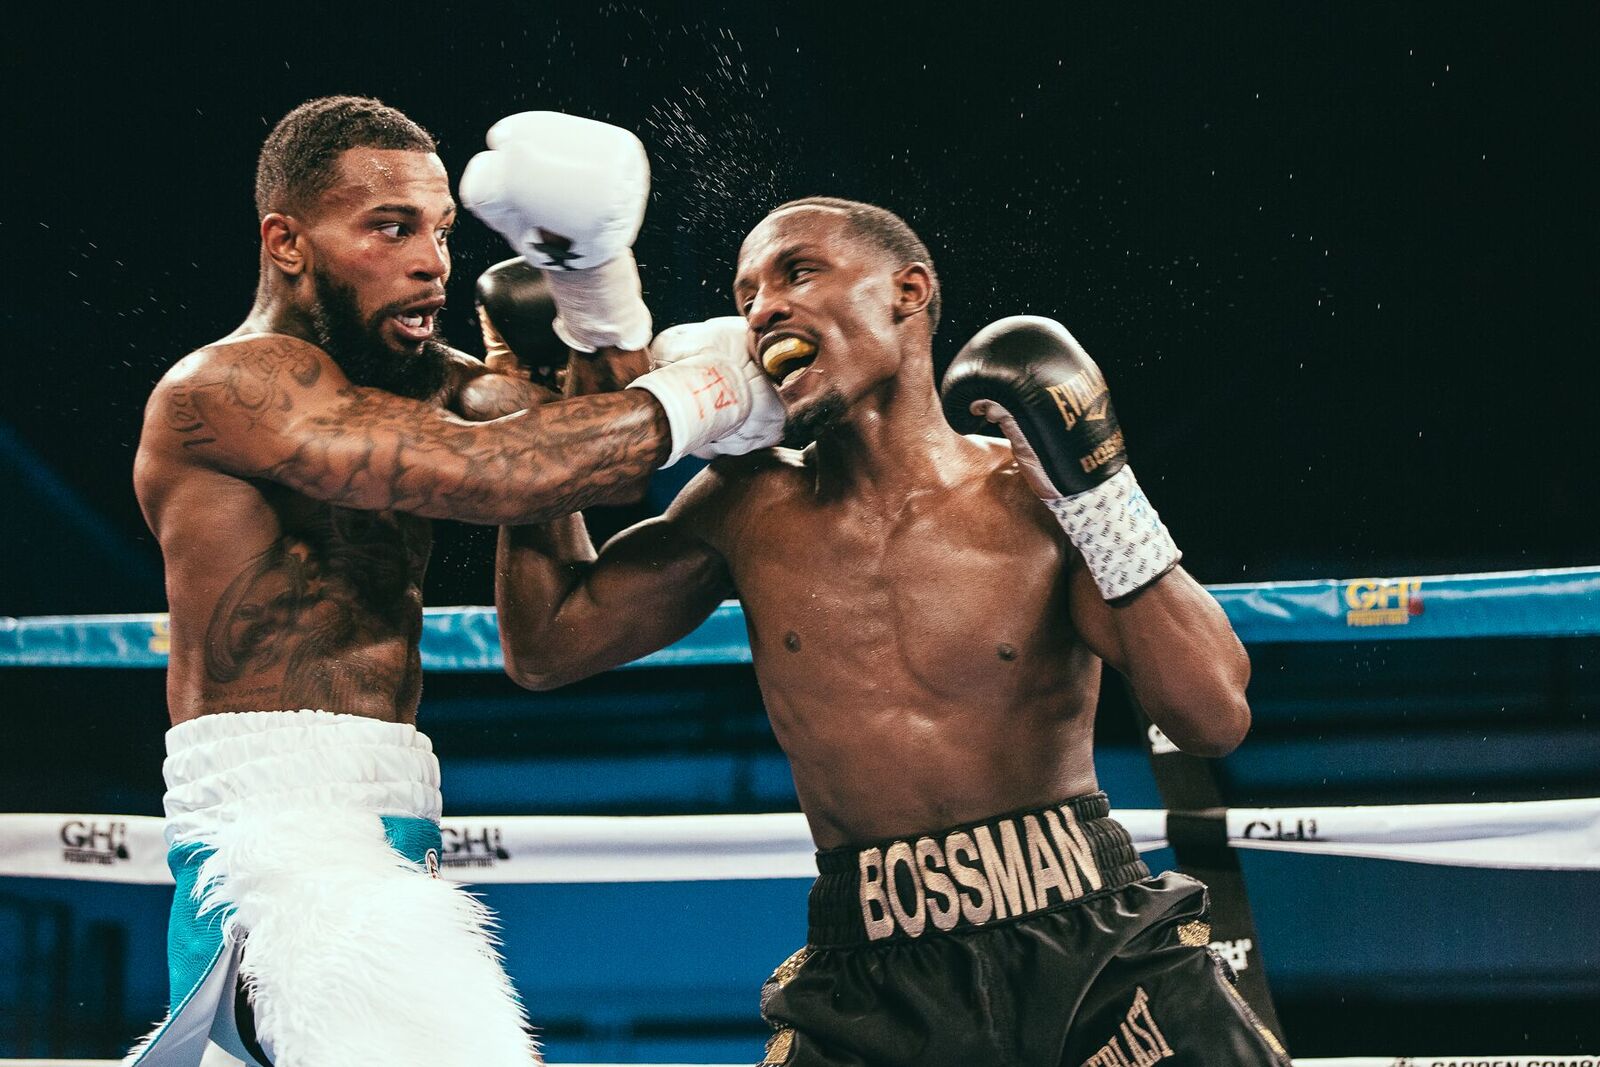 Junior welterweight Montana Love (left) vs. Kenneth Sims Jr. Photo credit: Rosie Cohe/Showtime